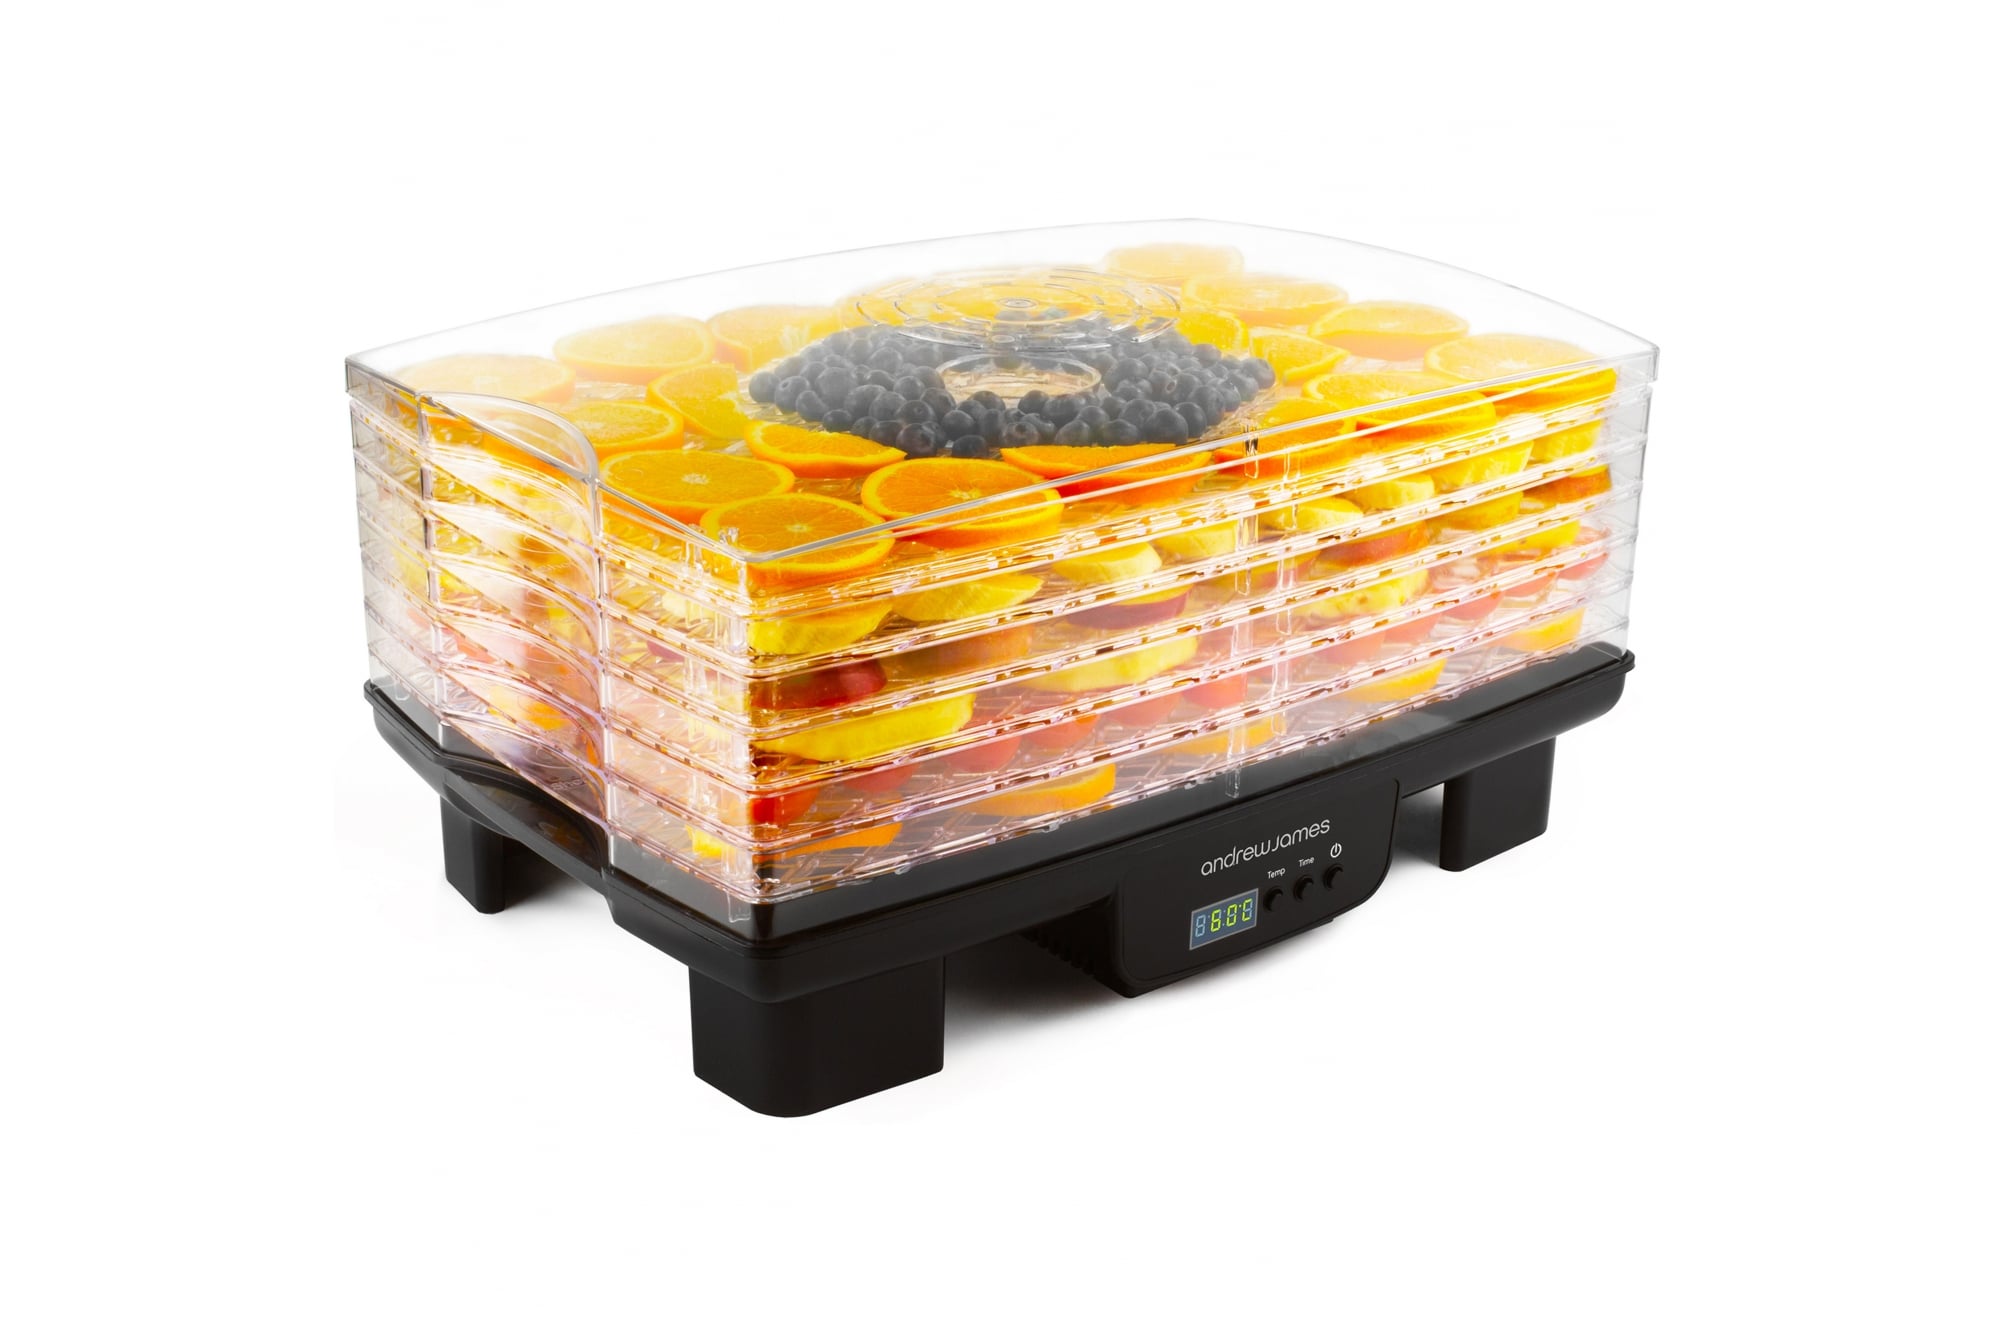 Andrew James Black Rectangular Digital Food Dehydrator with and Temperature